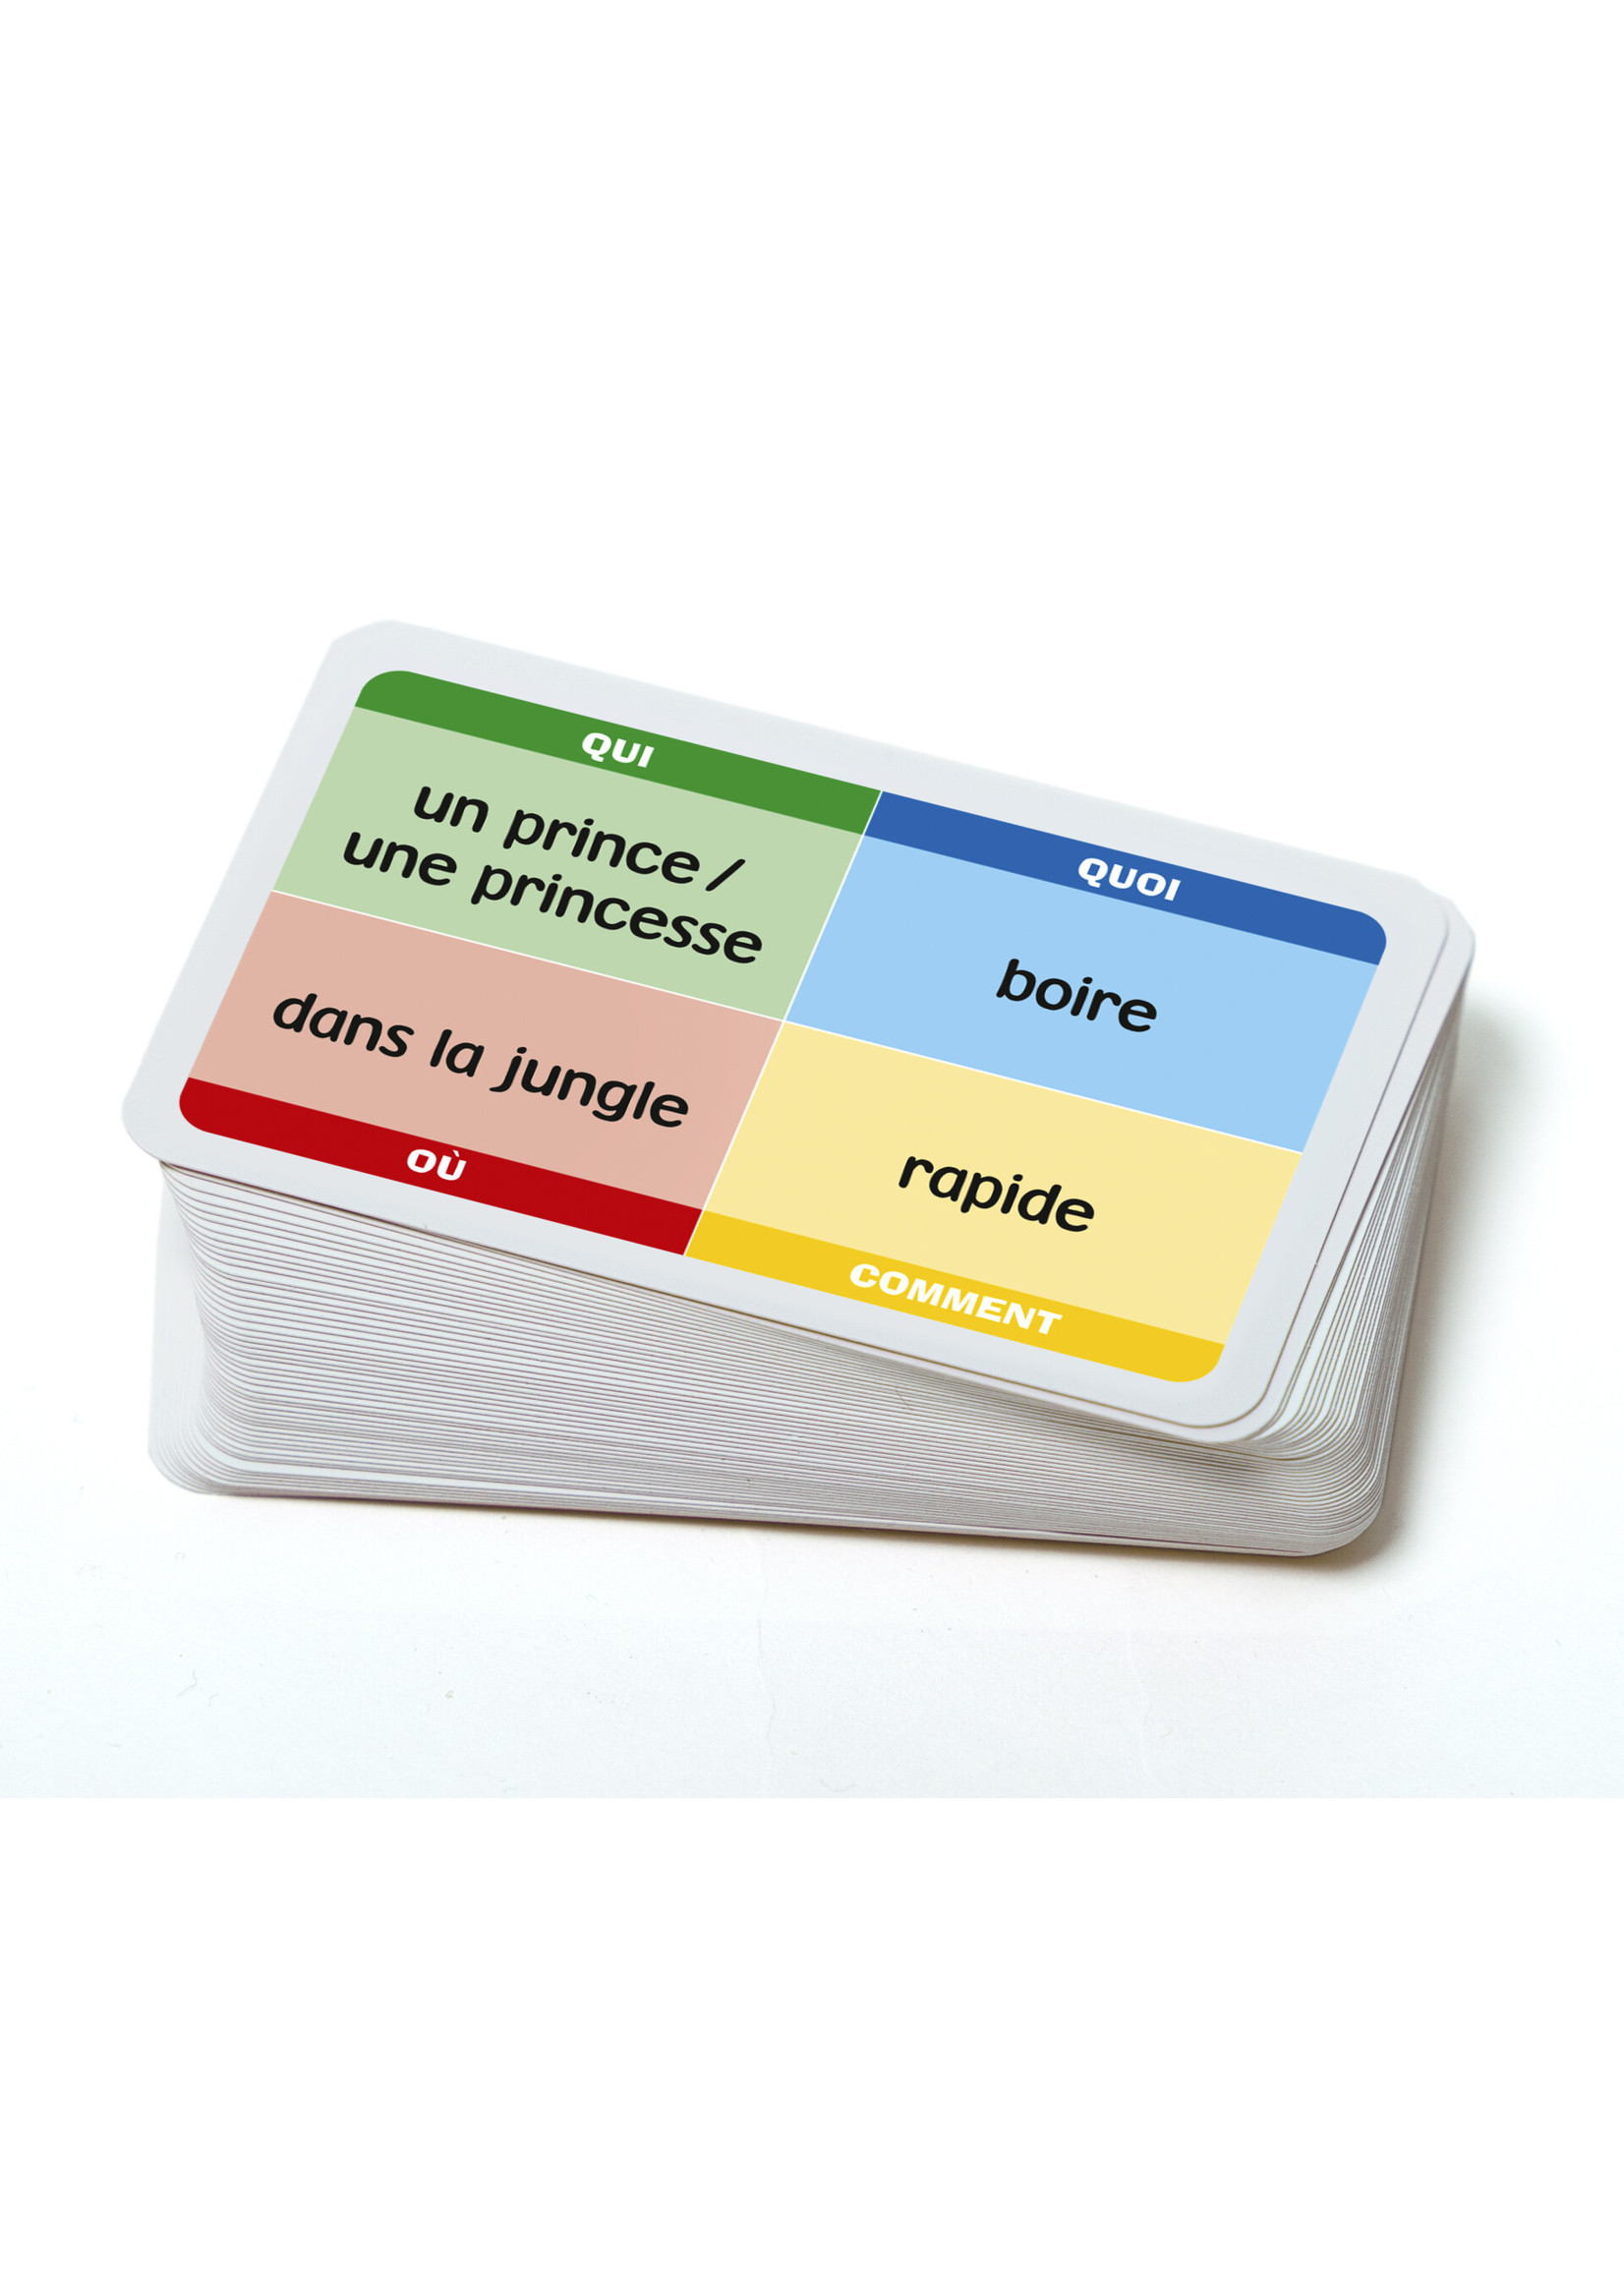 French storycards